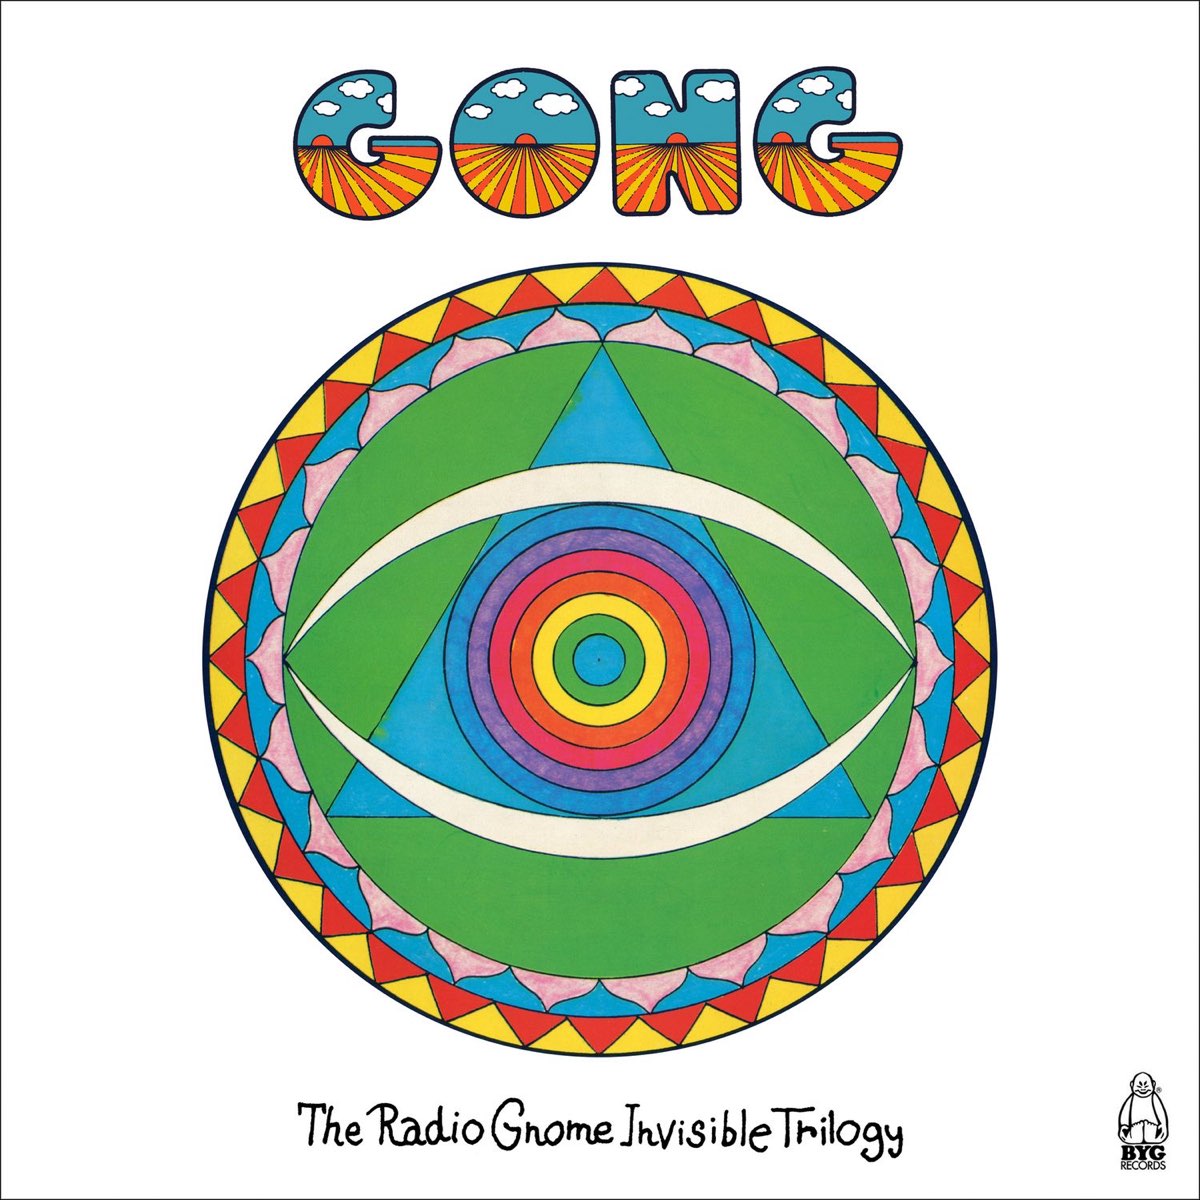 Radio Gnome Invisible Trilogy by Gong on Apple Music